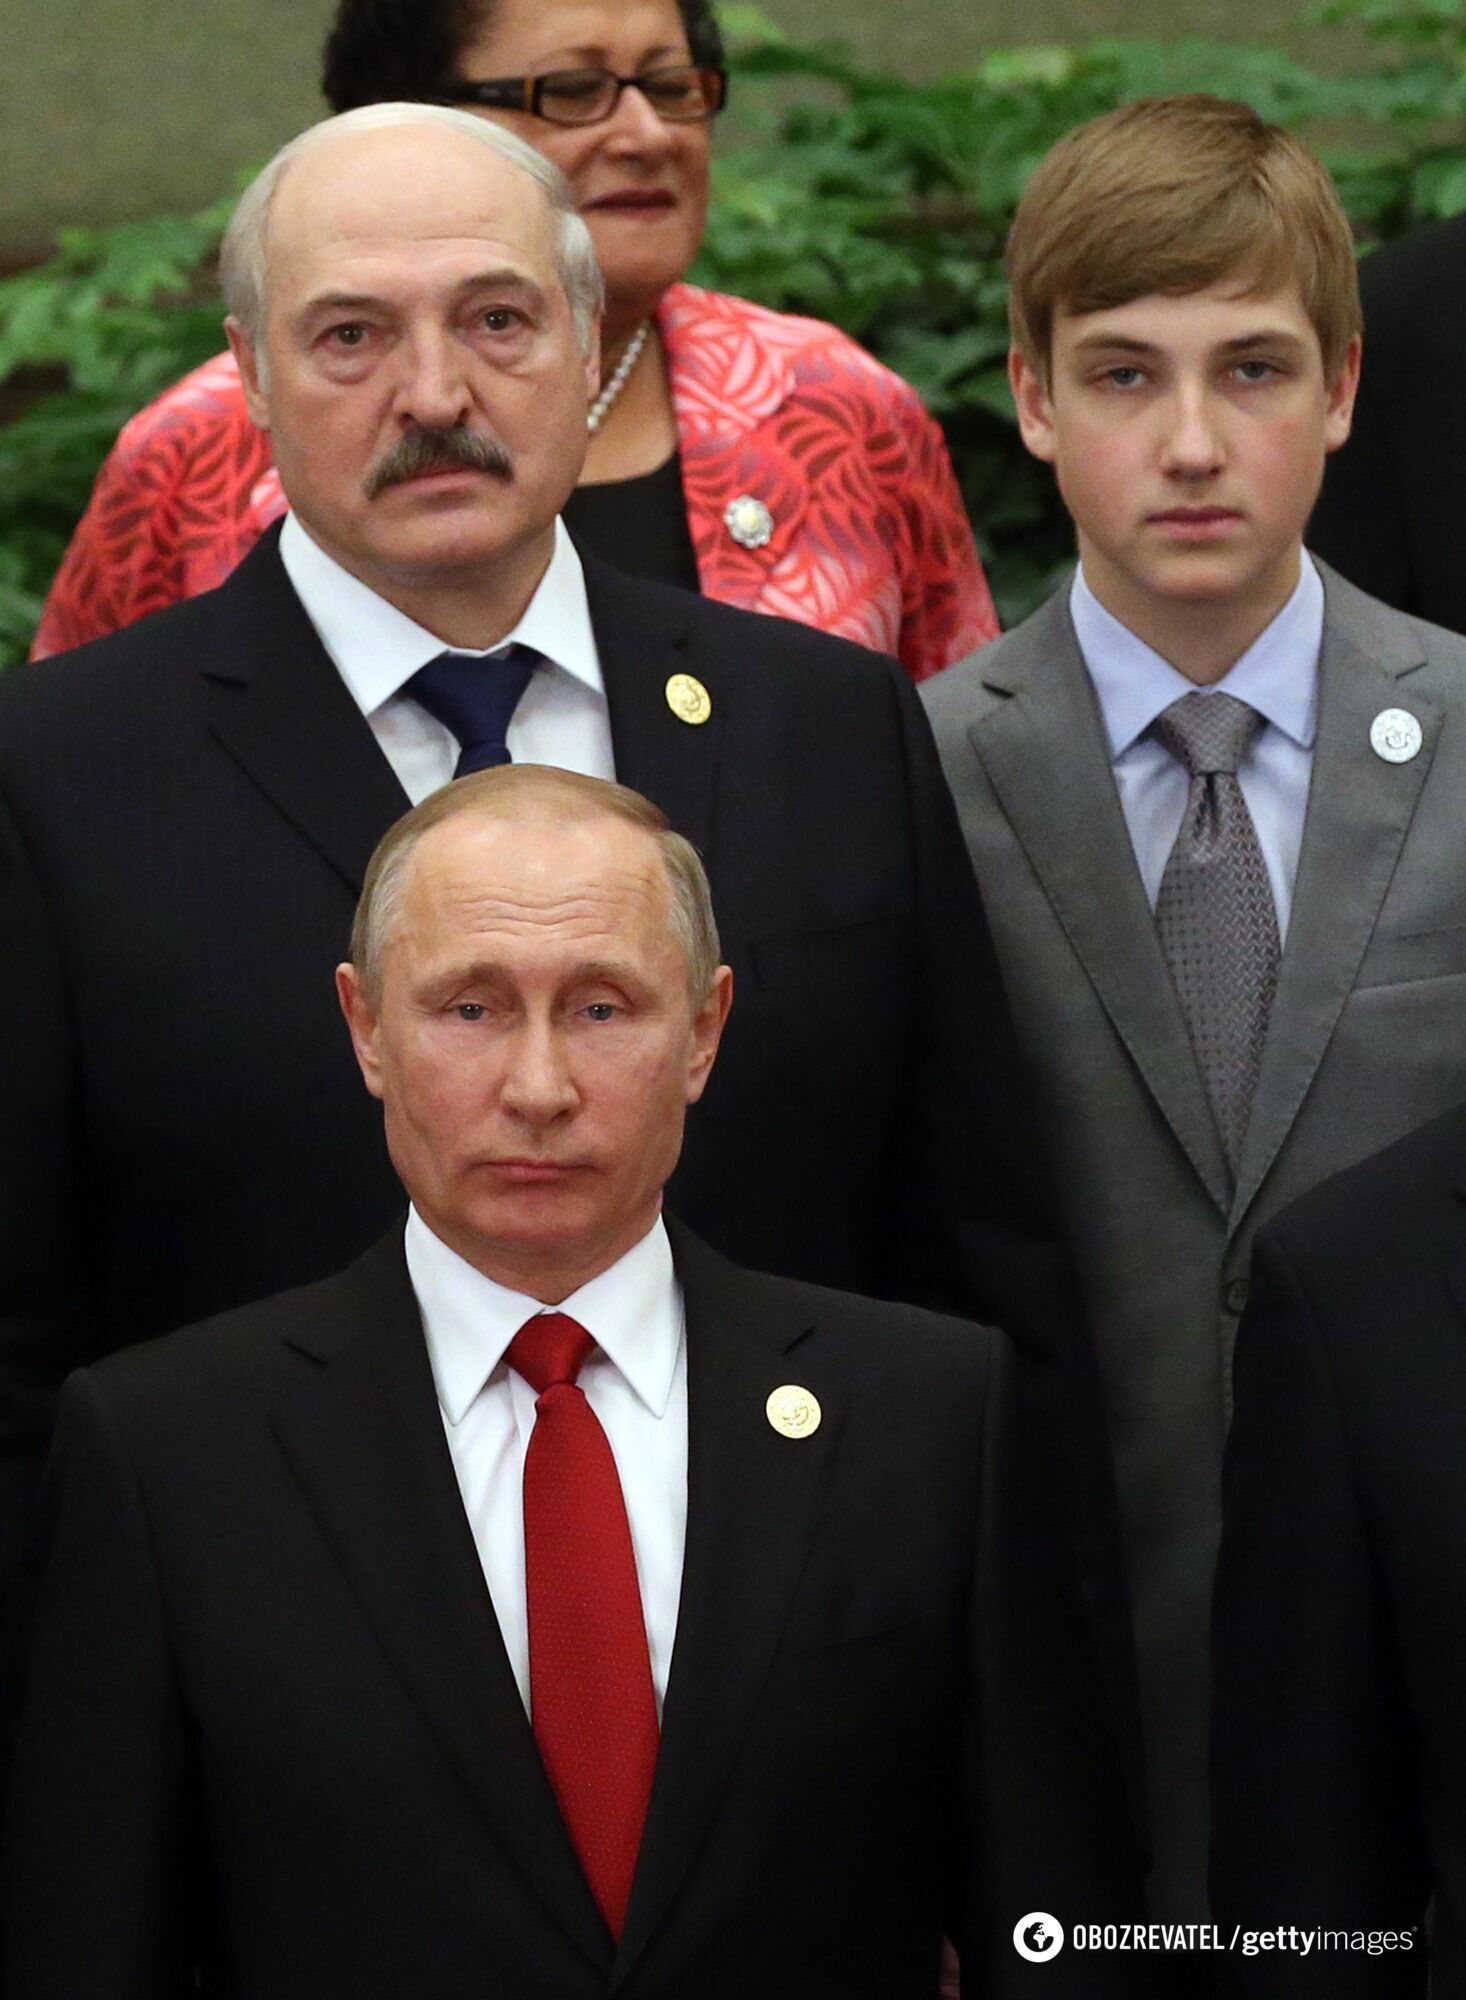 A ''harem'' of mistresses and an ''inconvenient'' son: what Belarusian dictator Lukashenko is hiding and why he tried to get rid of his child